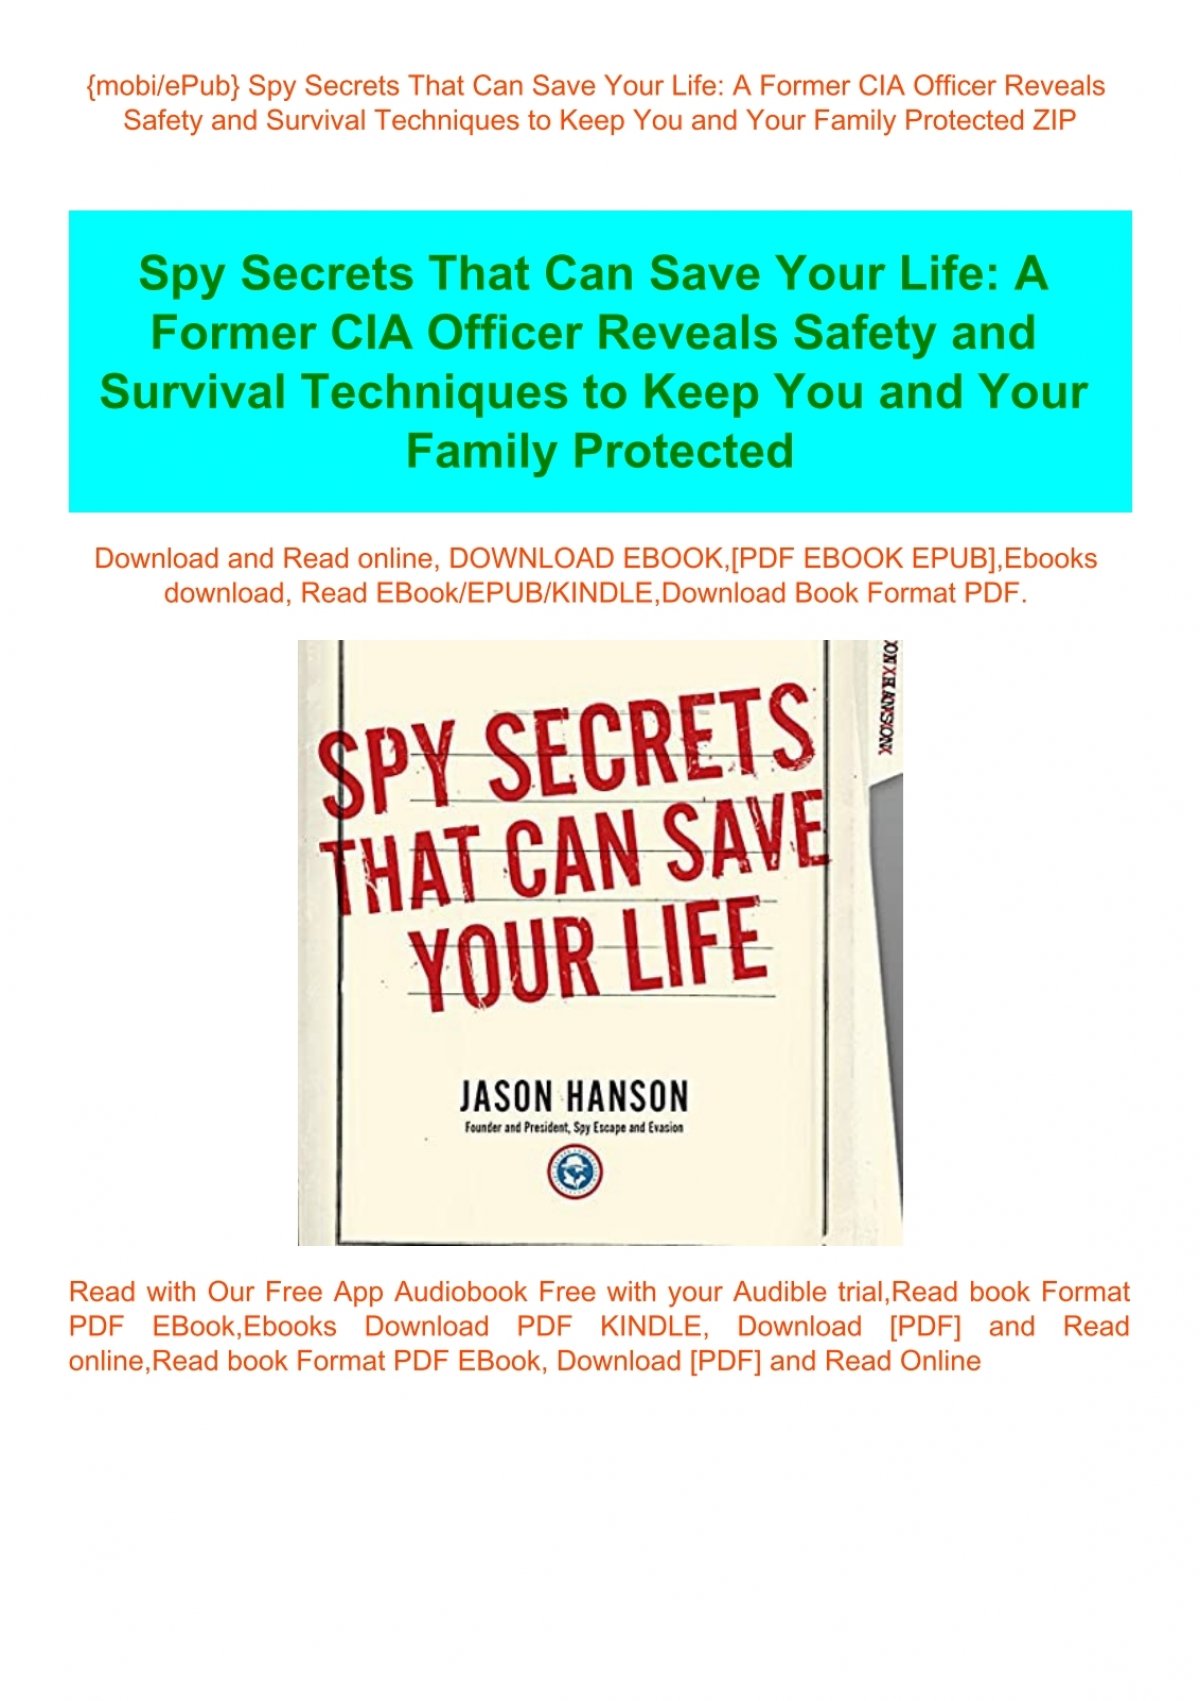 Mobiepub Spy Secrets That Can Save Your Life A Former Cia Officer Reveals Safety And Survival Techniques To Keep You And Your Family Protected Zip